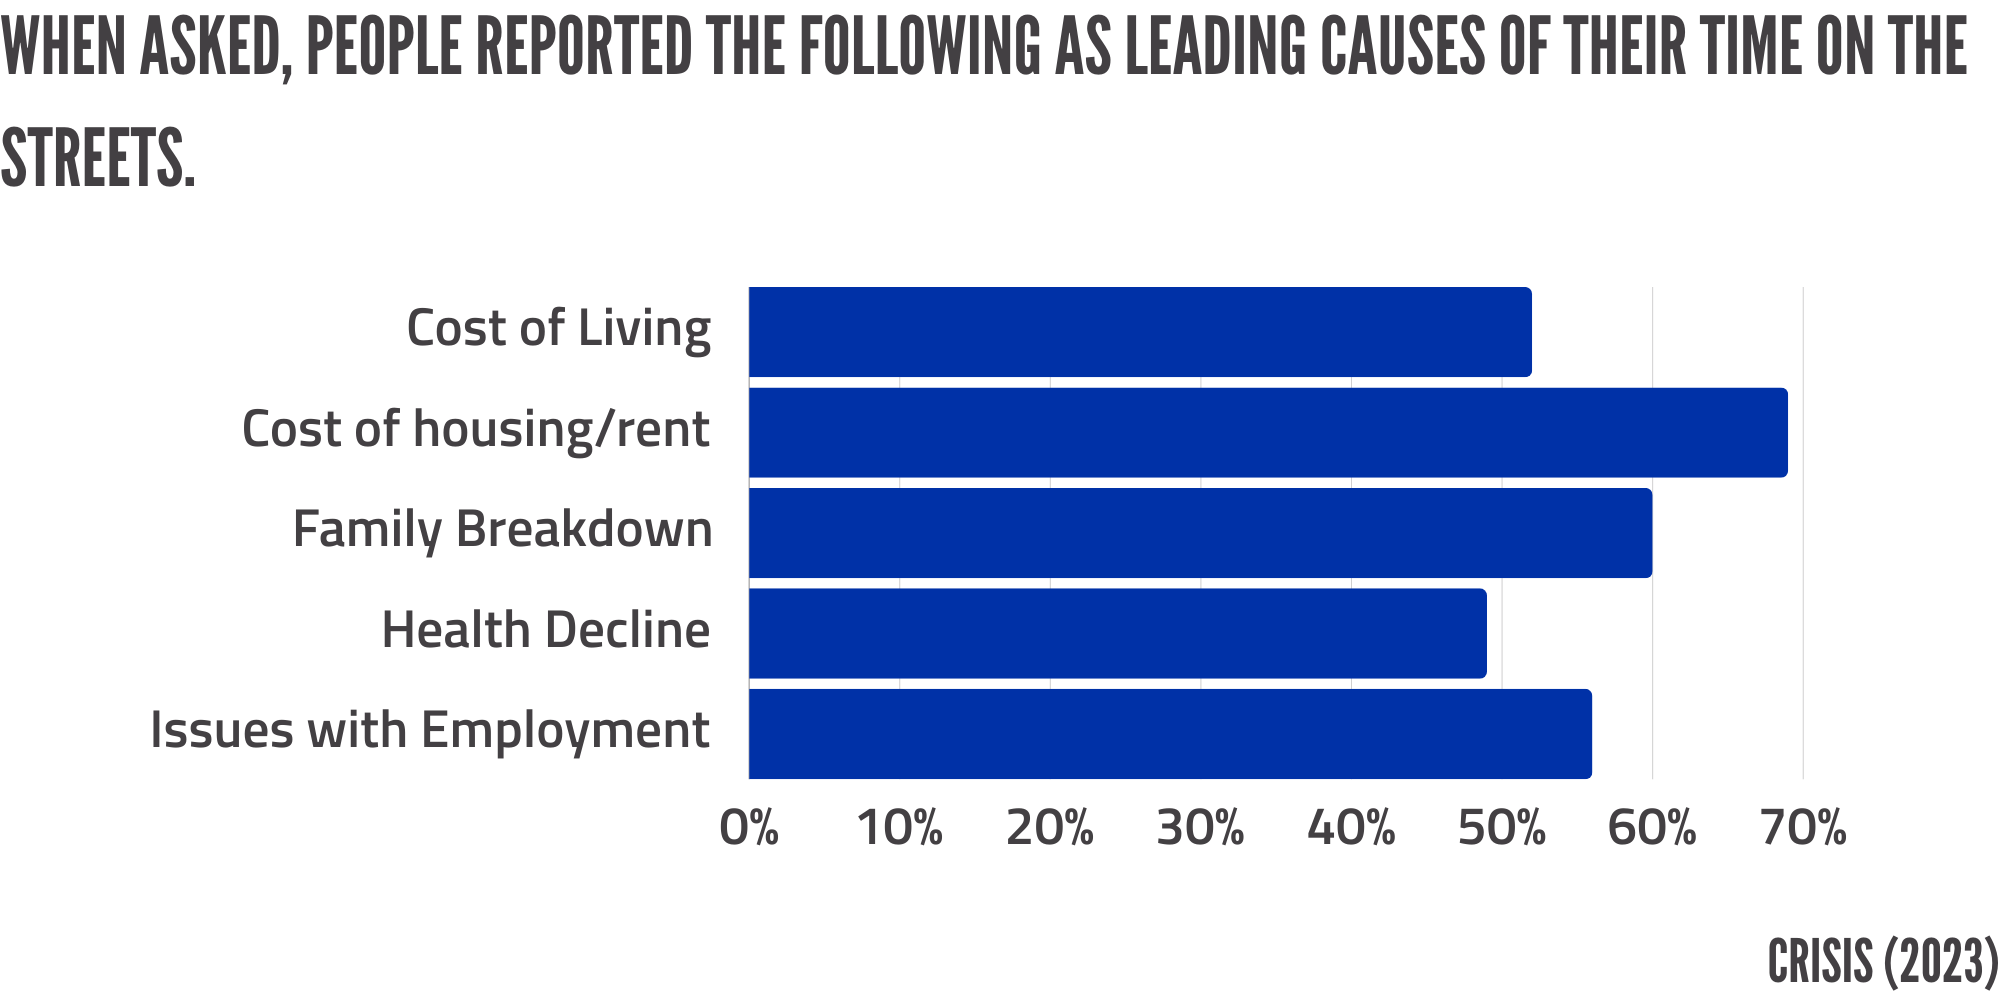 Chart shows how often people reported different causes of homelessness as leading factors in their homelessness. This includes the cost of living crisis (52%), Issues with housing and rent (69%), Family breakdown (60%), health decline (49%) and employment issues (56%). 